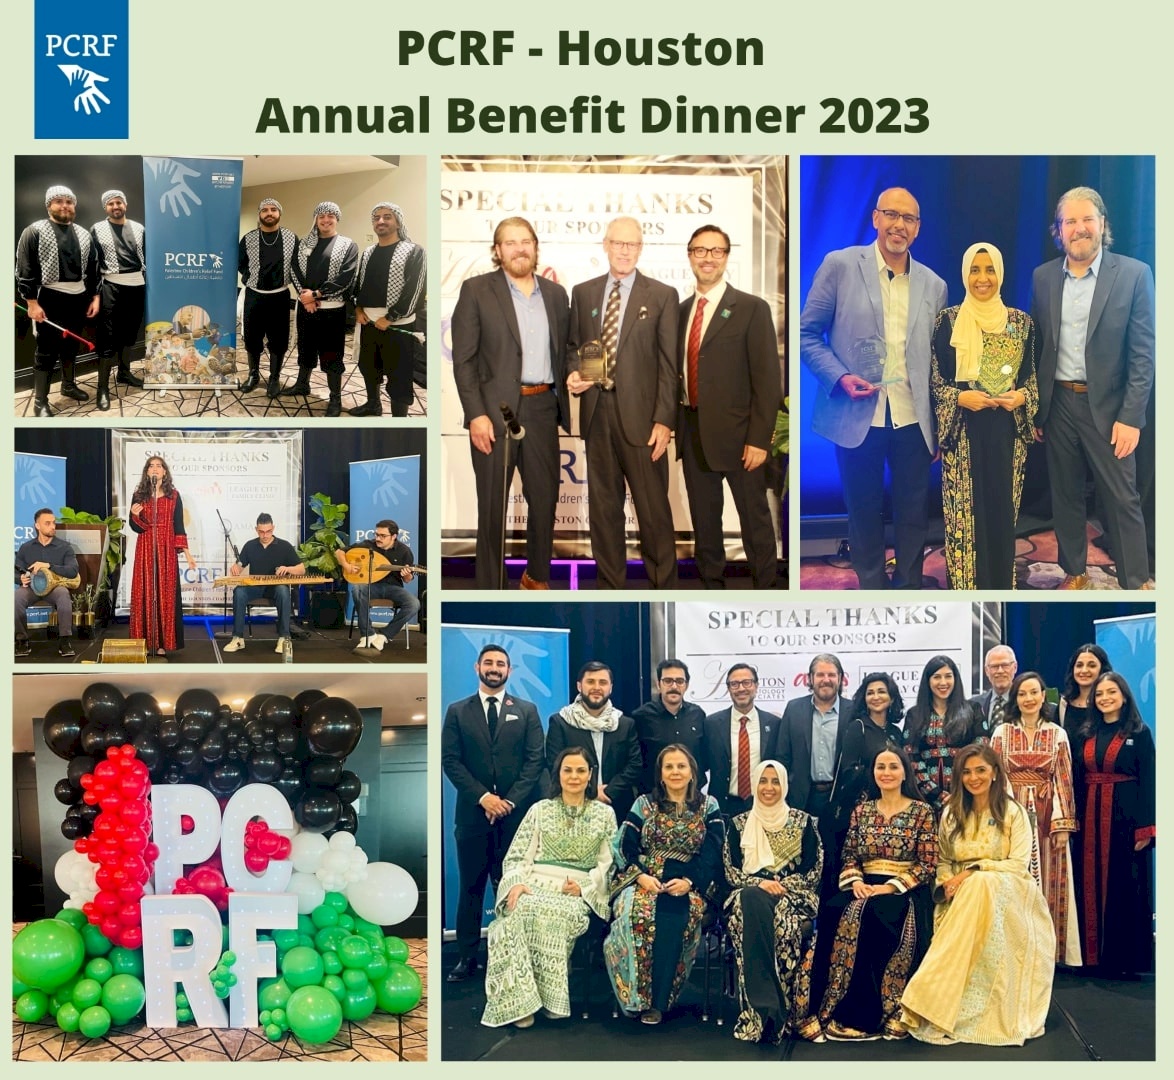 PCRF Houston First Annual Benefit Dinner 2023